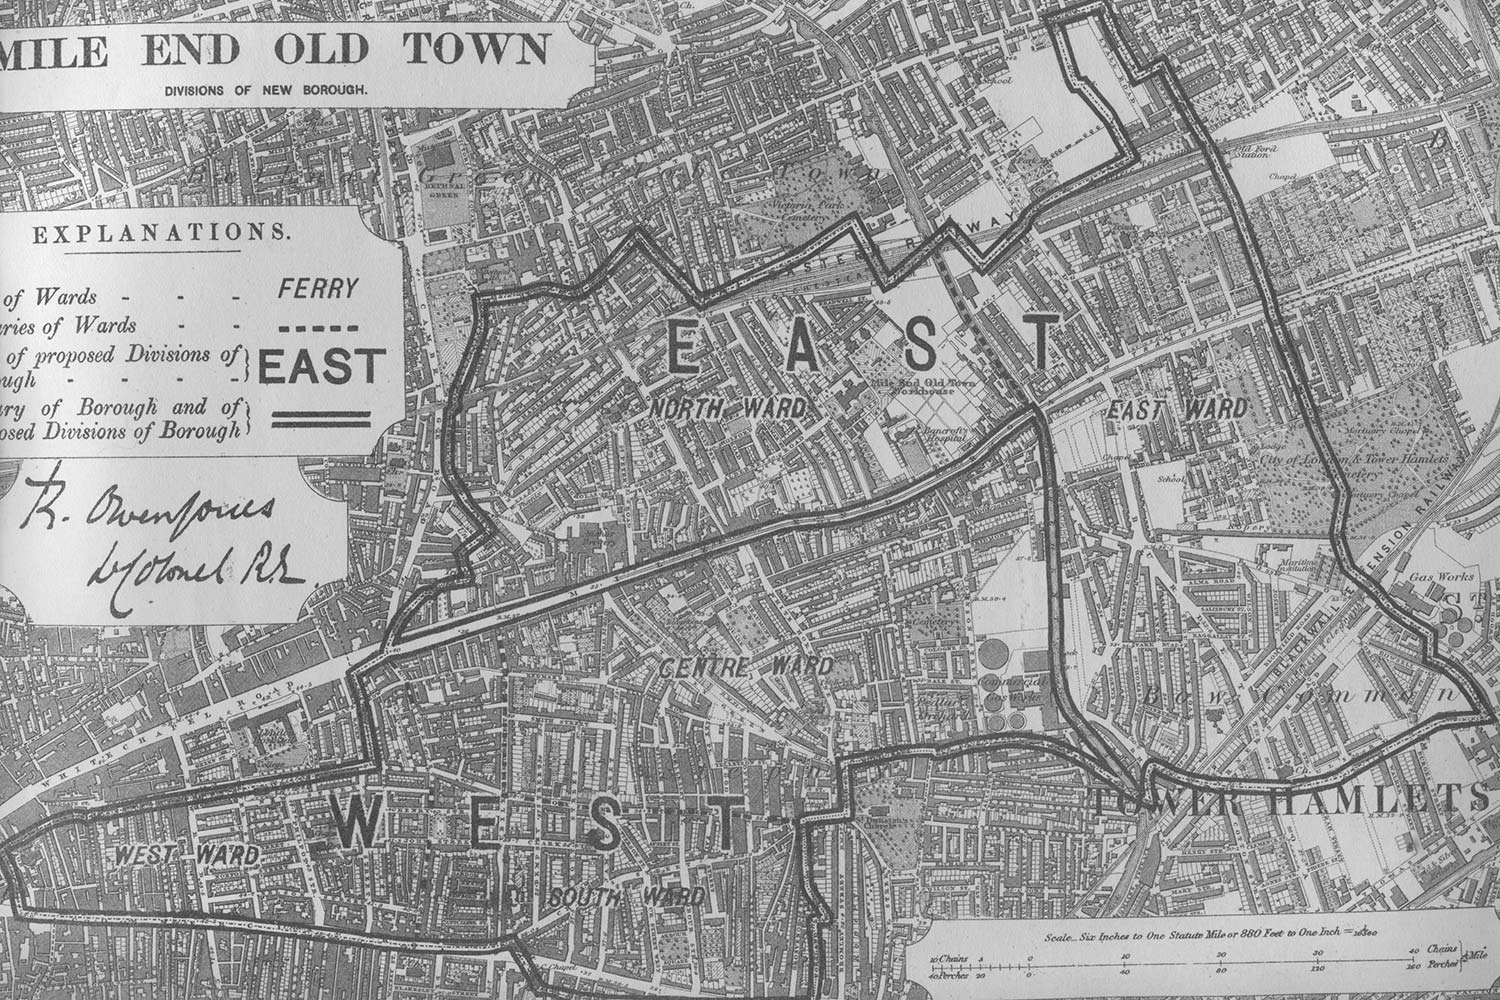 Mile end divisions in 1885